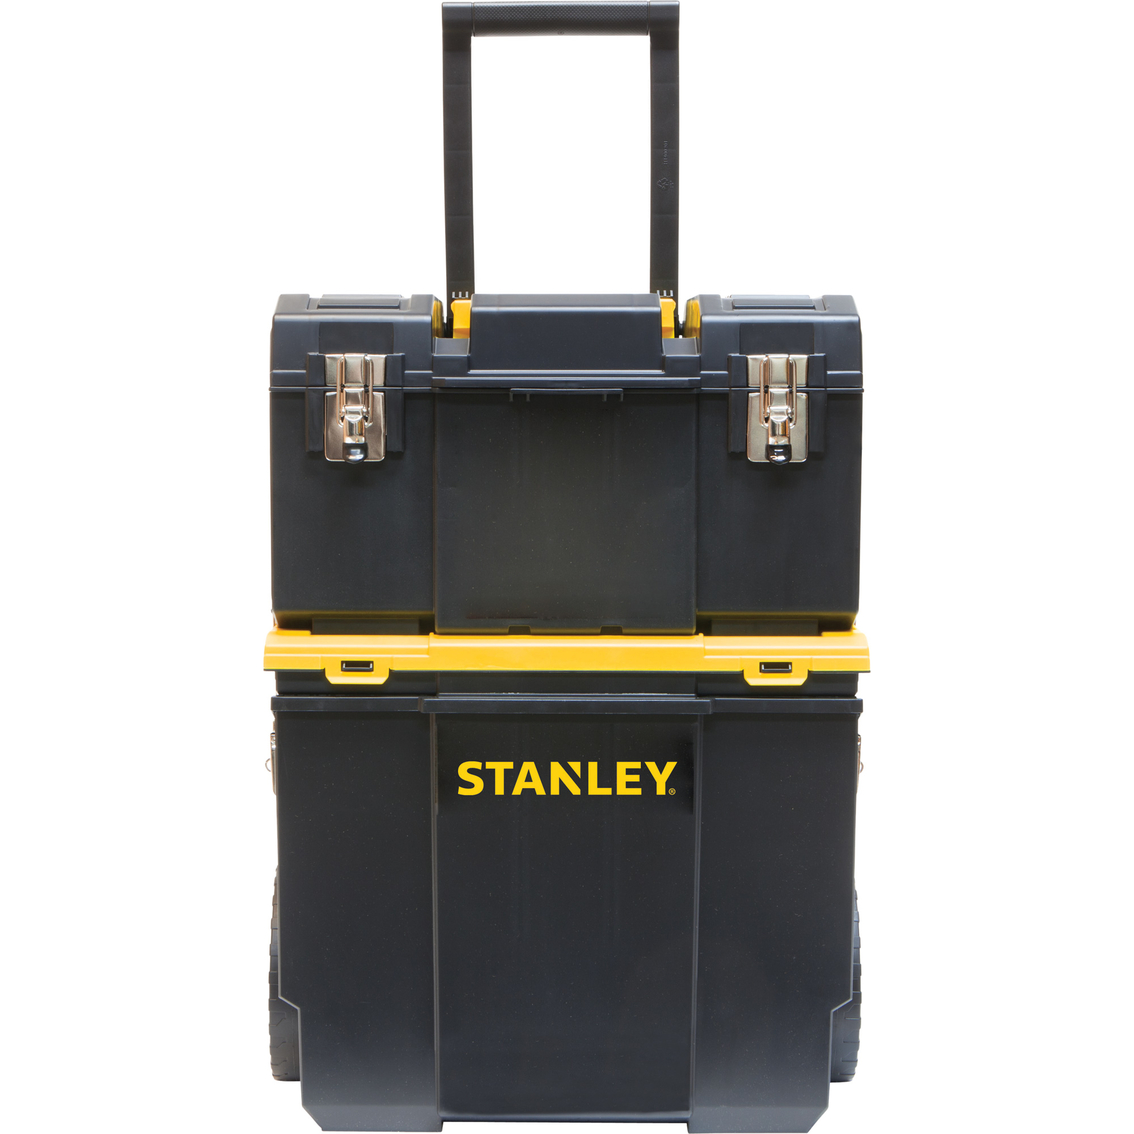 Stanley 3 in 1 Mobile Work Center - Image 2 of 4